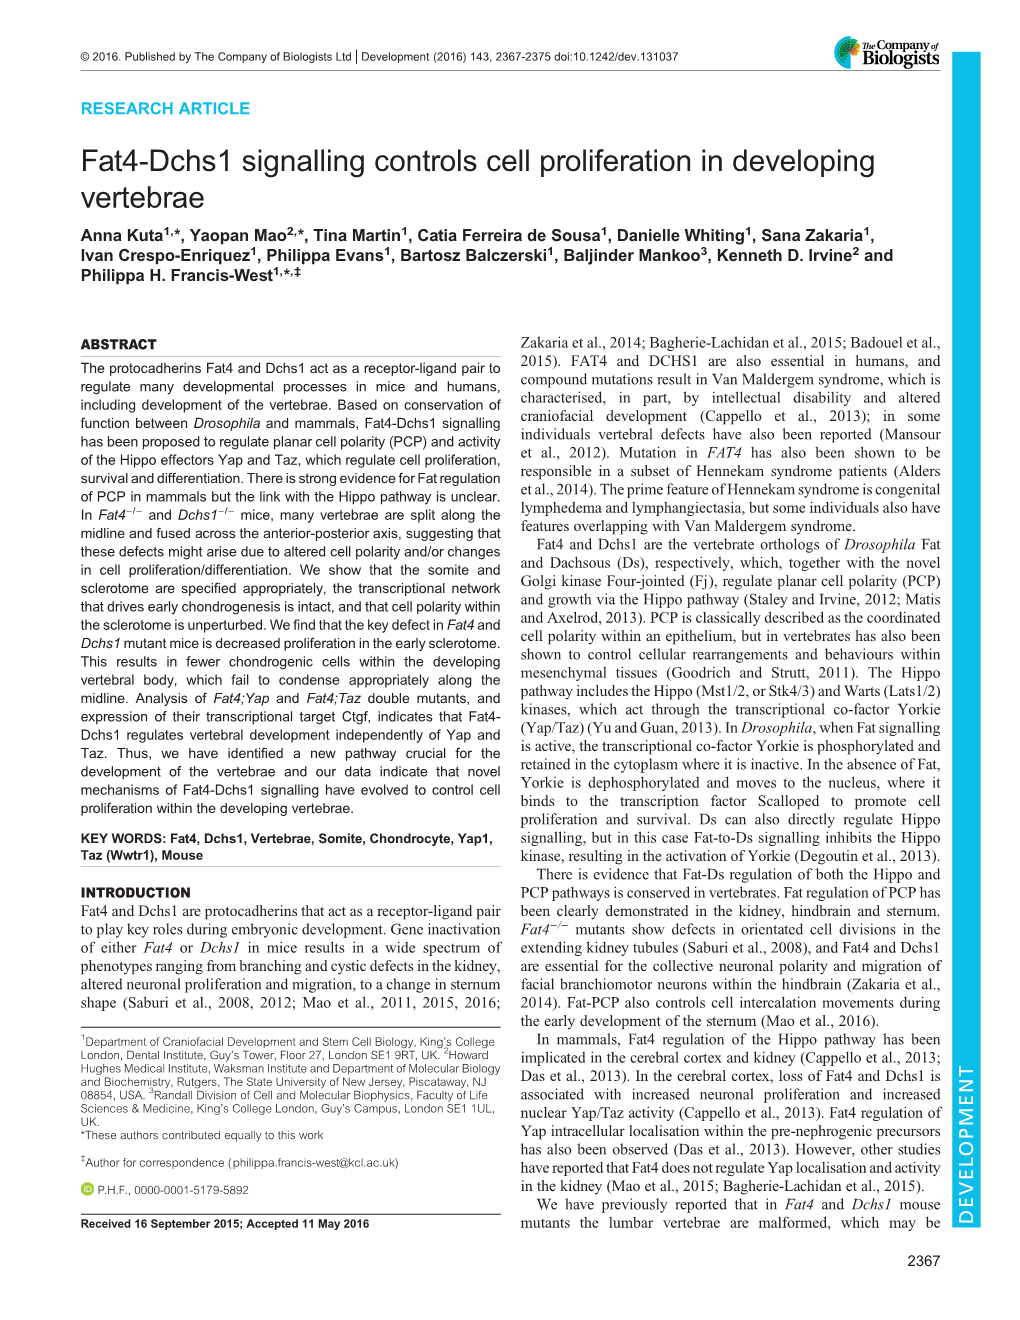 Fat4-Dchs1 Signalling Controls Cell Proliferation in Developing Vertebrae